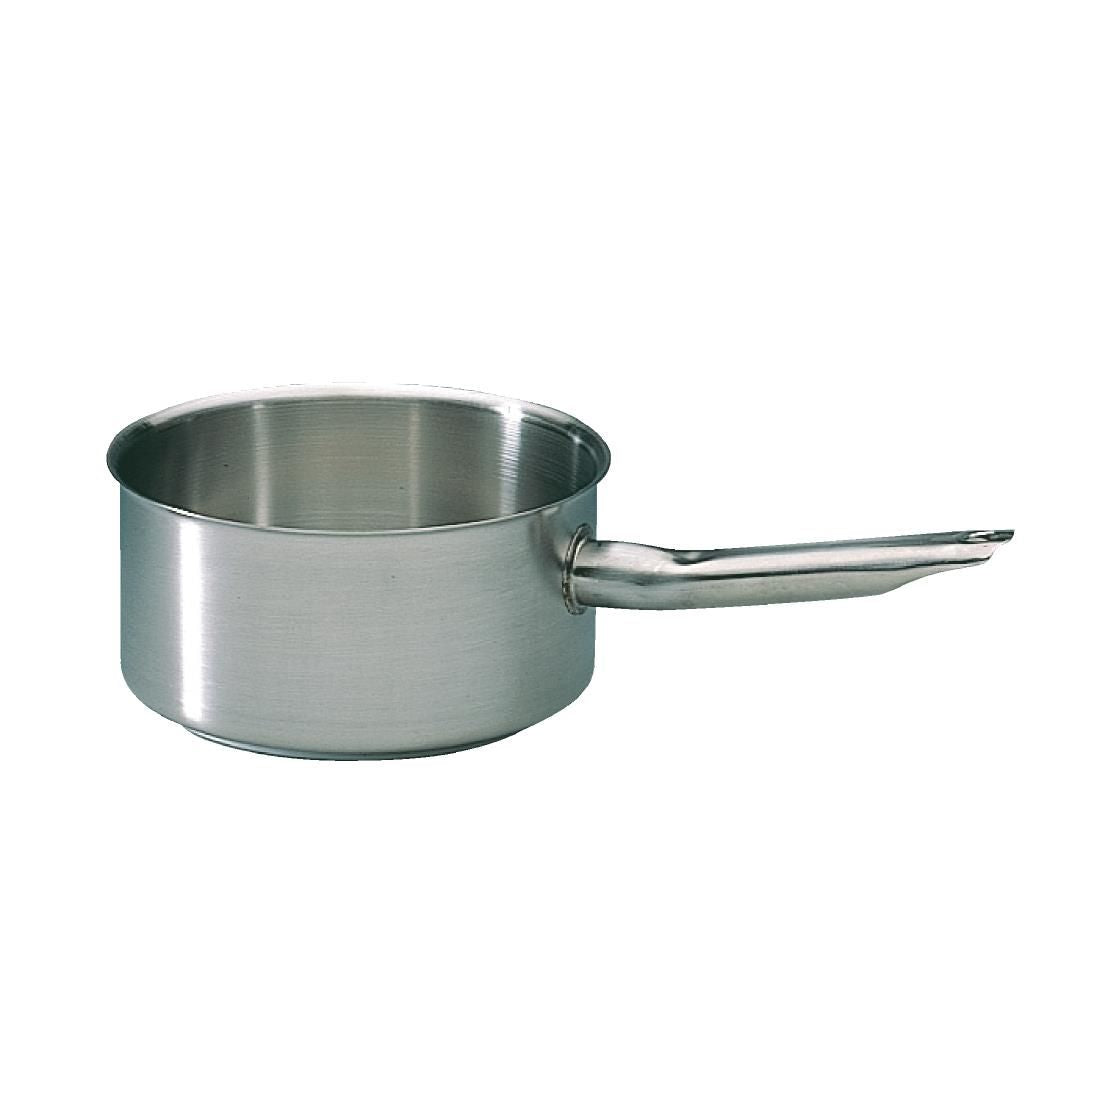 Bourgeat Stainless Steel Excellence Saucepan 2.2Ltr JD Catering Equipment Solutions Ltd